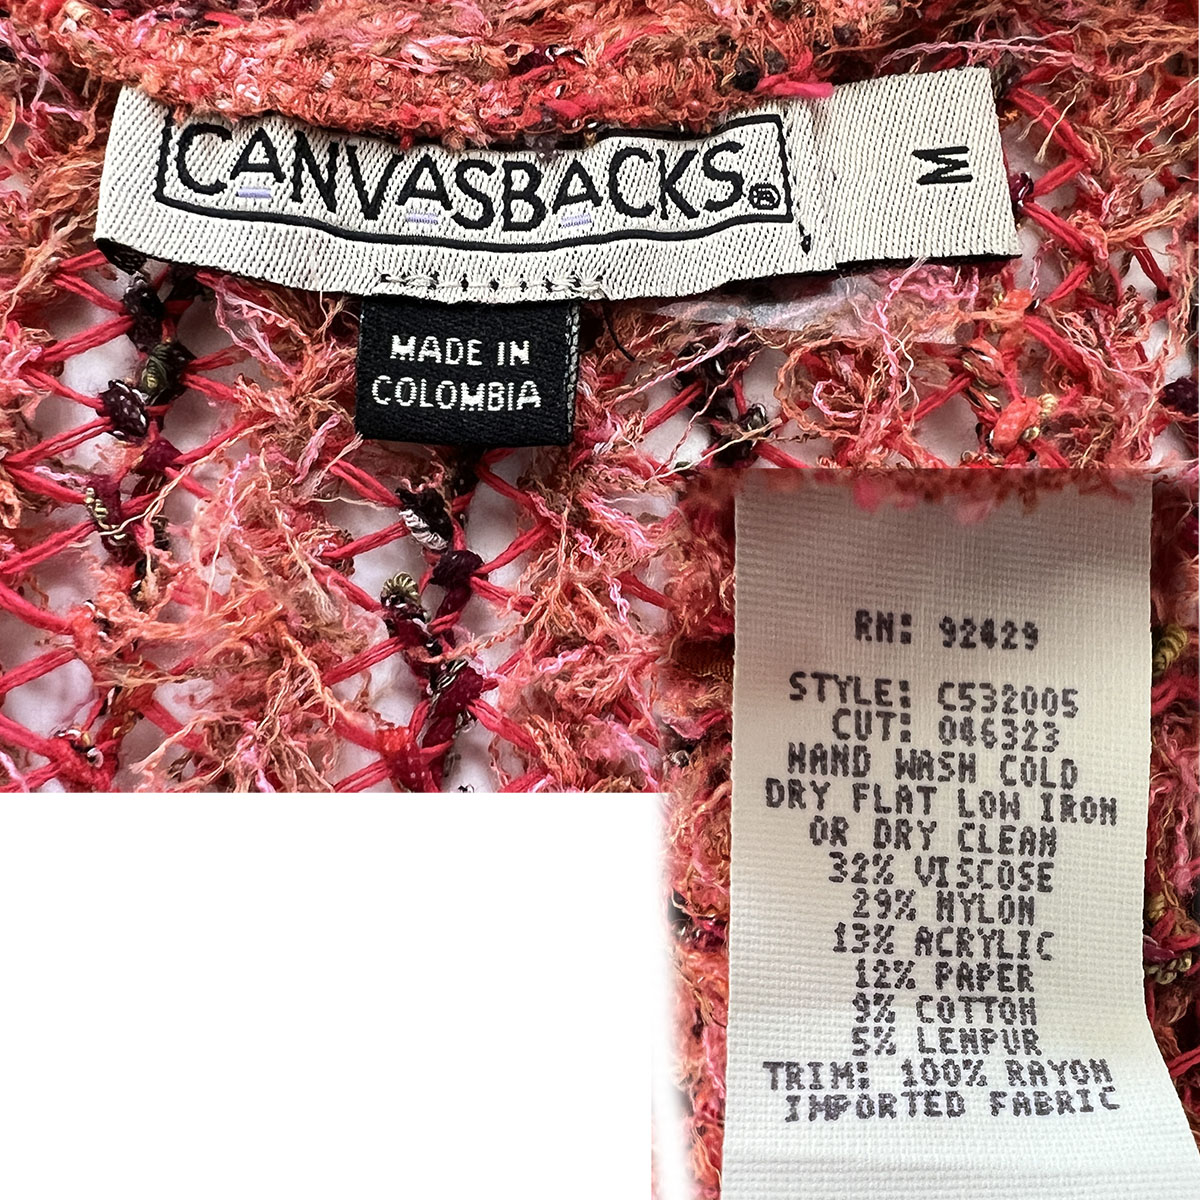 Canvasback clothing label